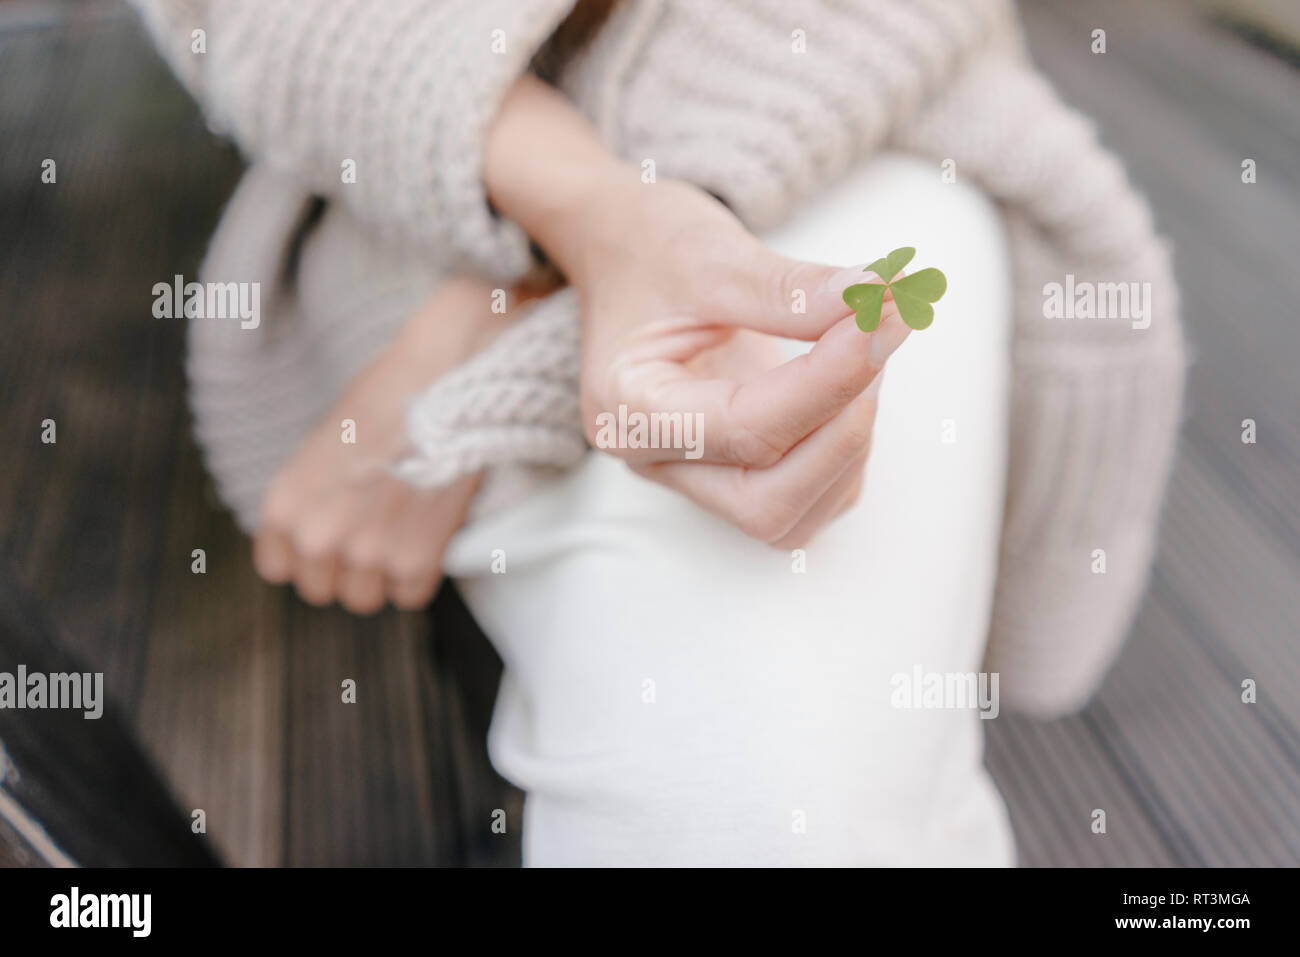 Woman's hand holding cloverleaf, close-up Stock Photo